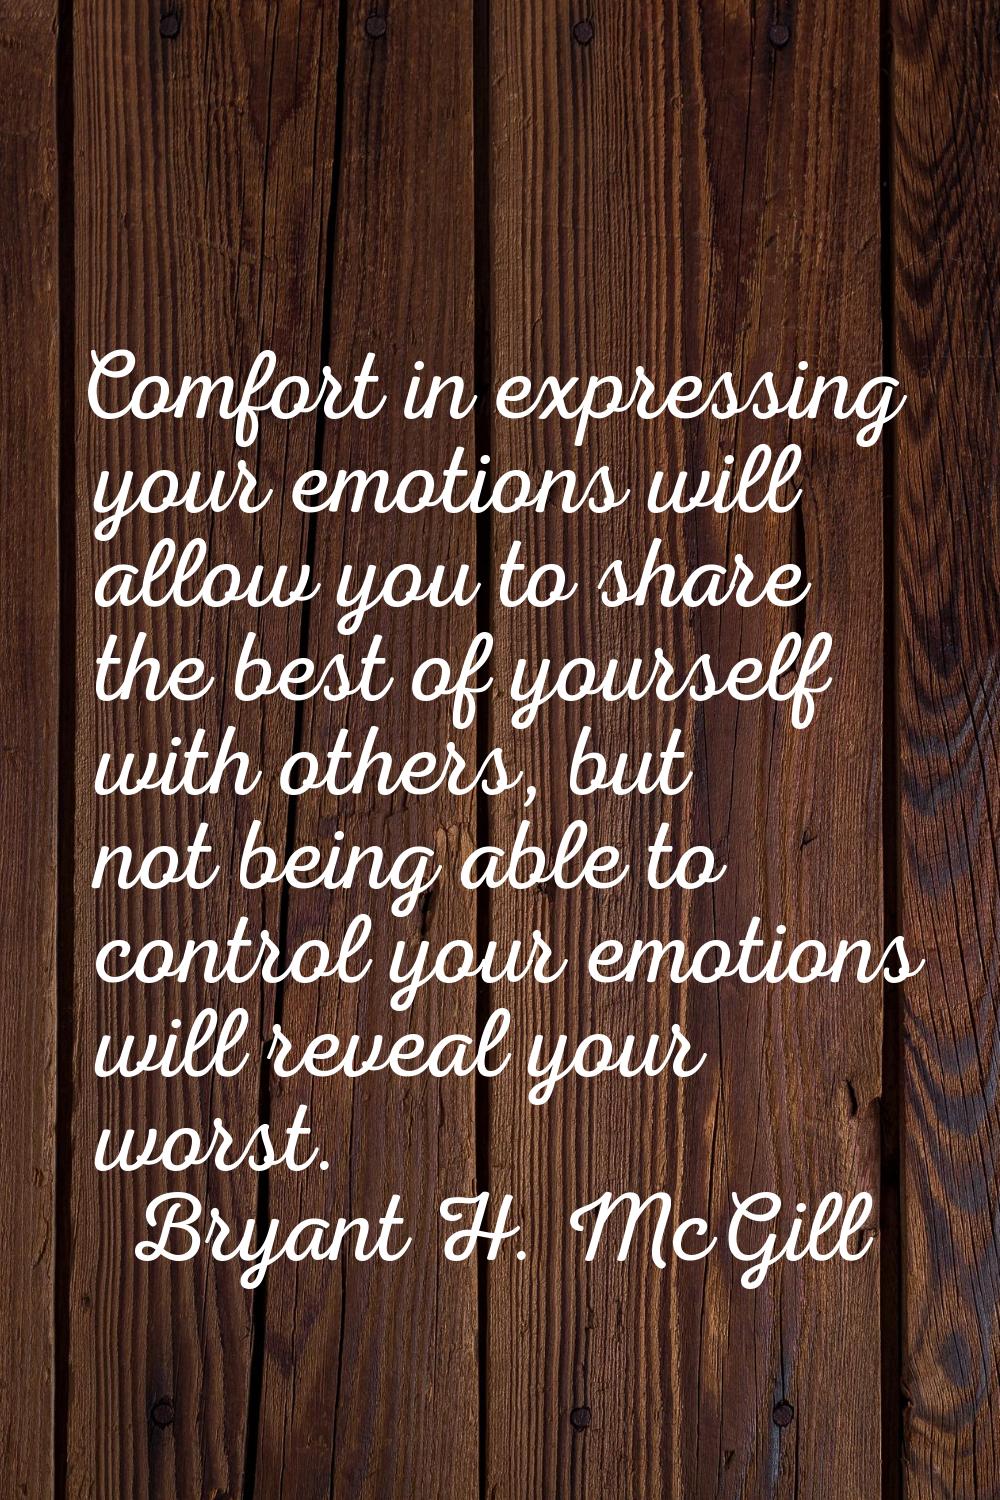 Comfort in expressing your emotions will allow you to share the best of yourself with others, but n